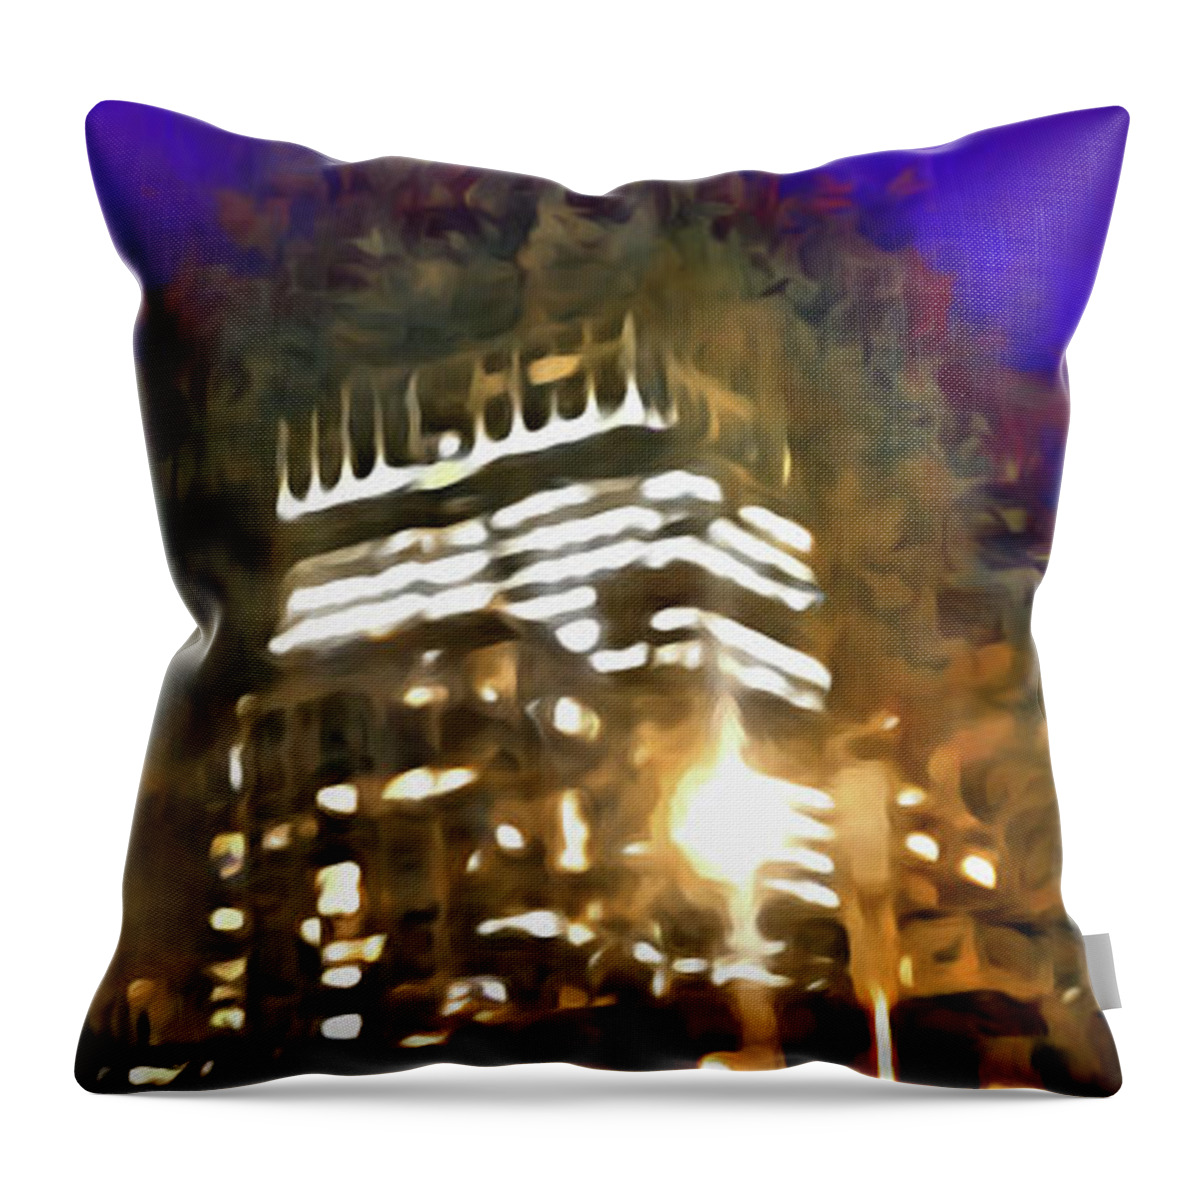 Cityscape Throw Pillow featuring the digital art City Flames by Paisley O'Farrell